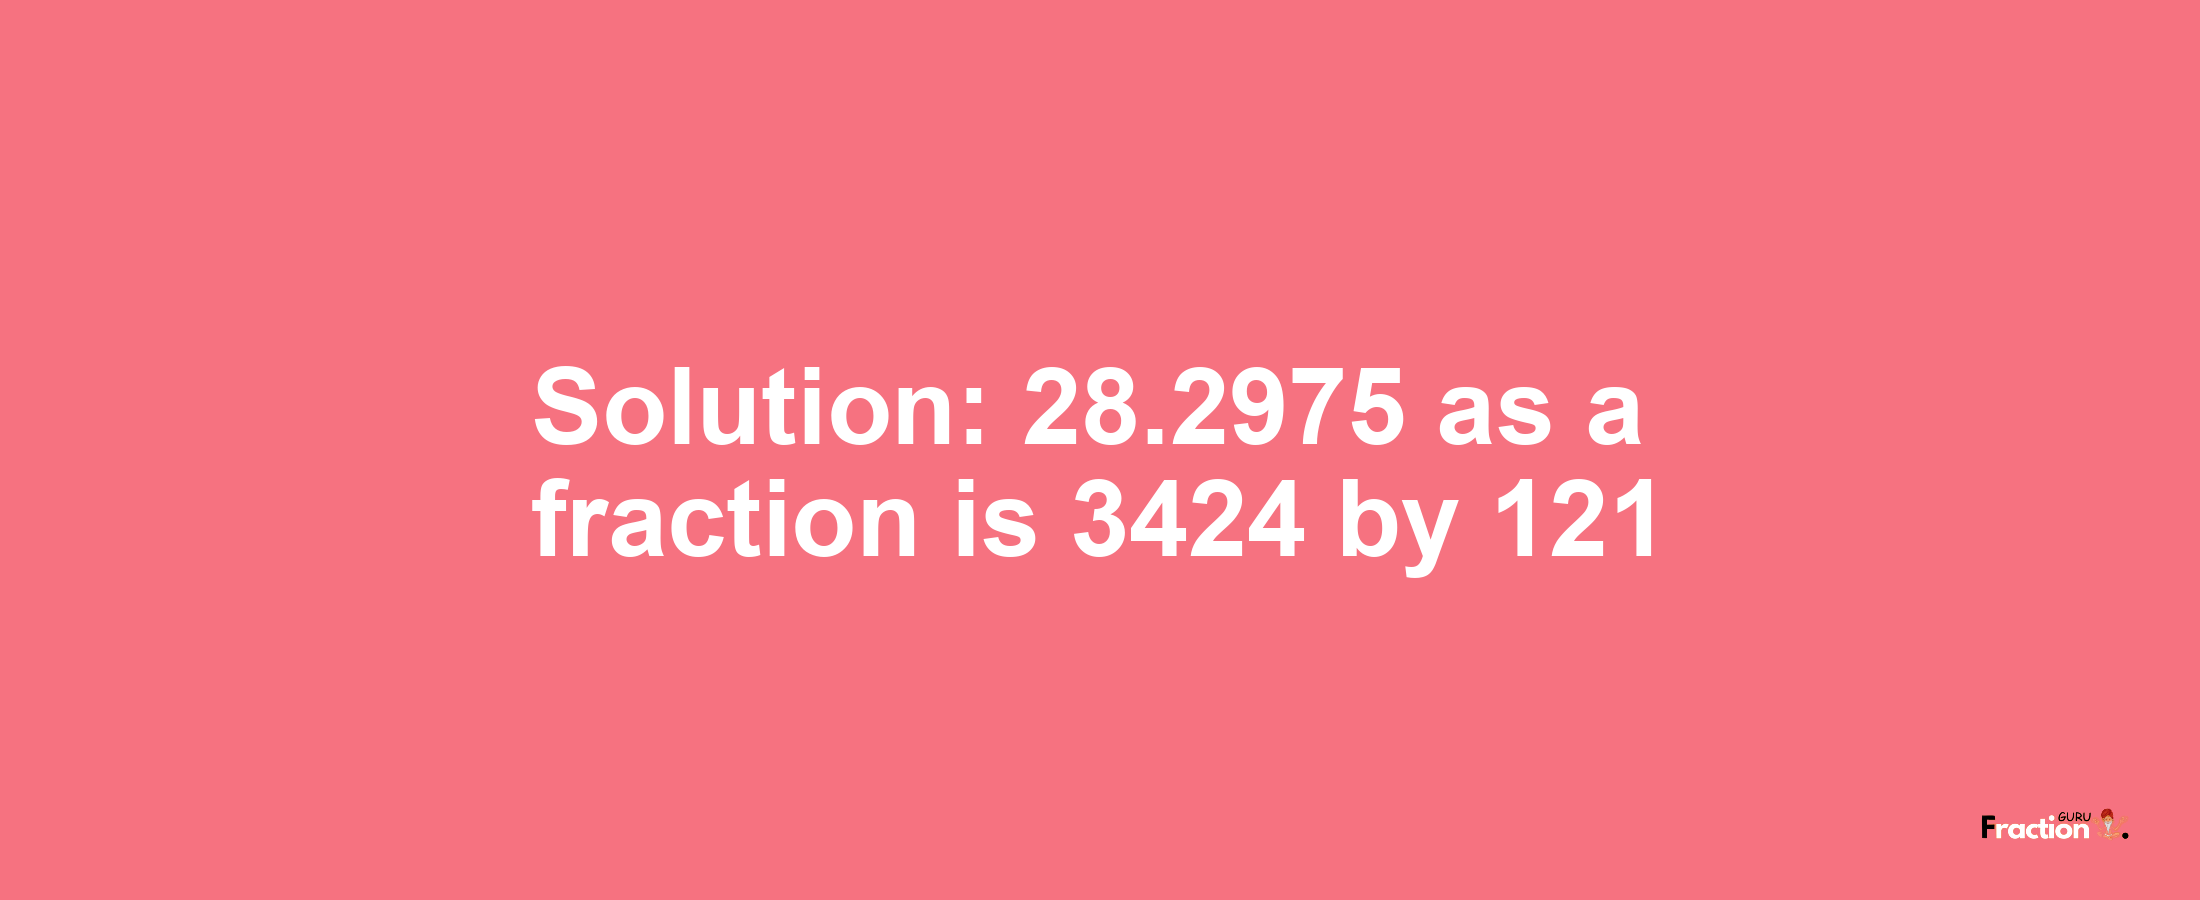 Solution:28.2975 as a fraction is 3424/121